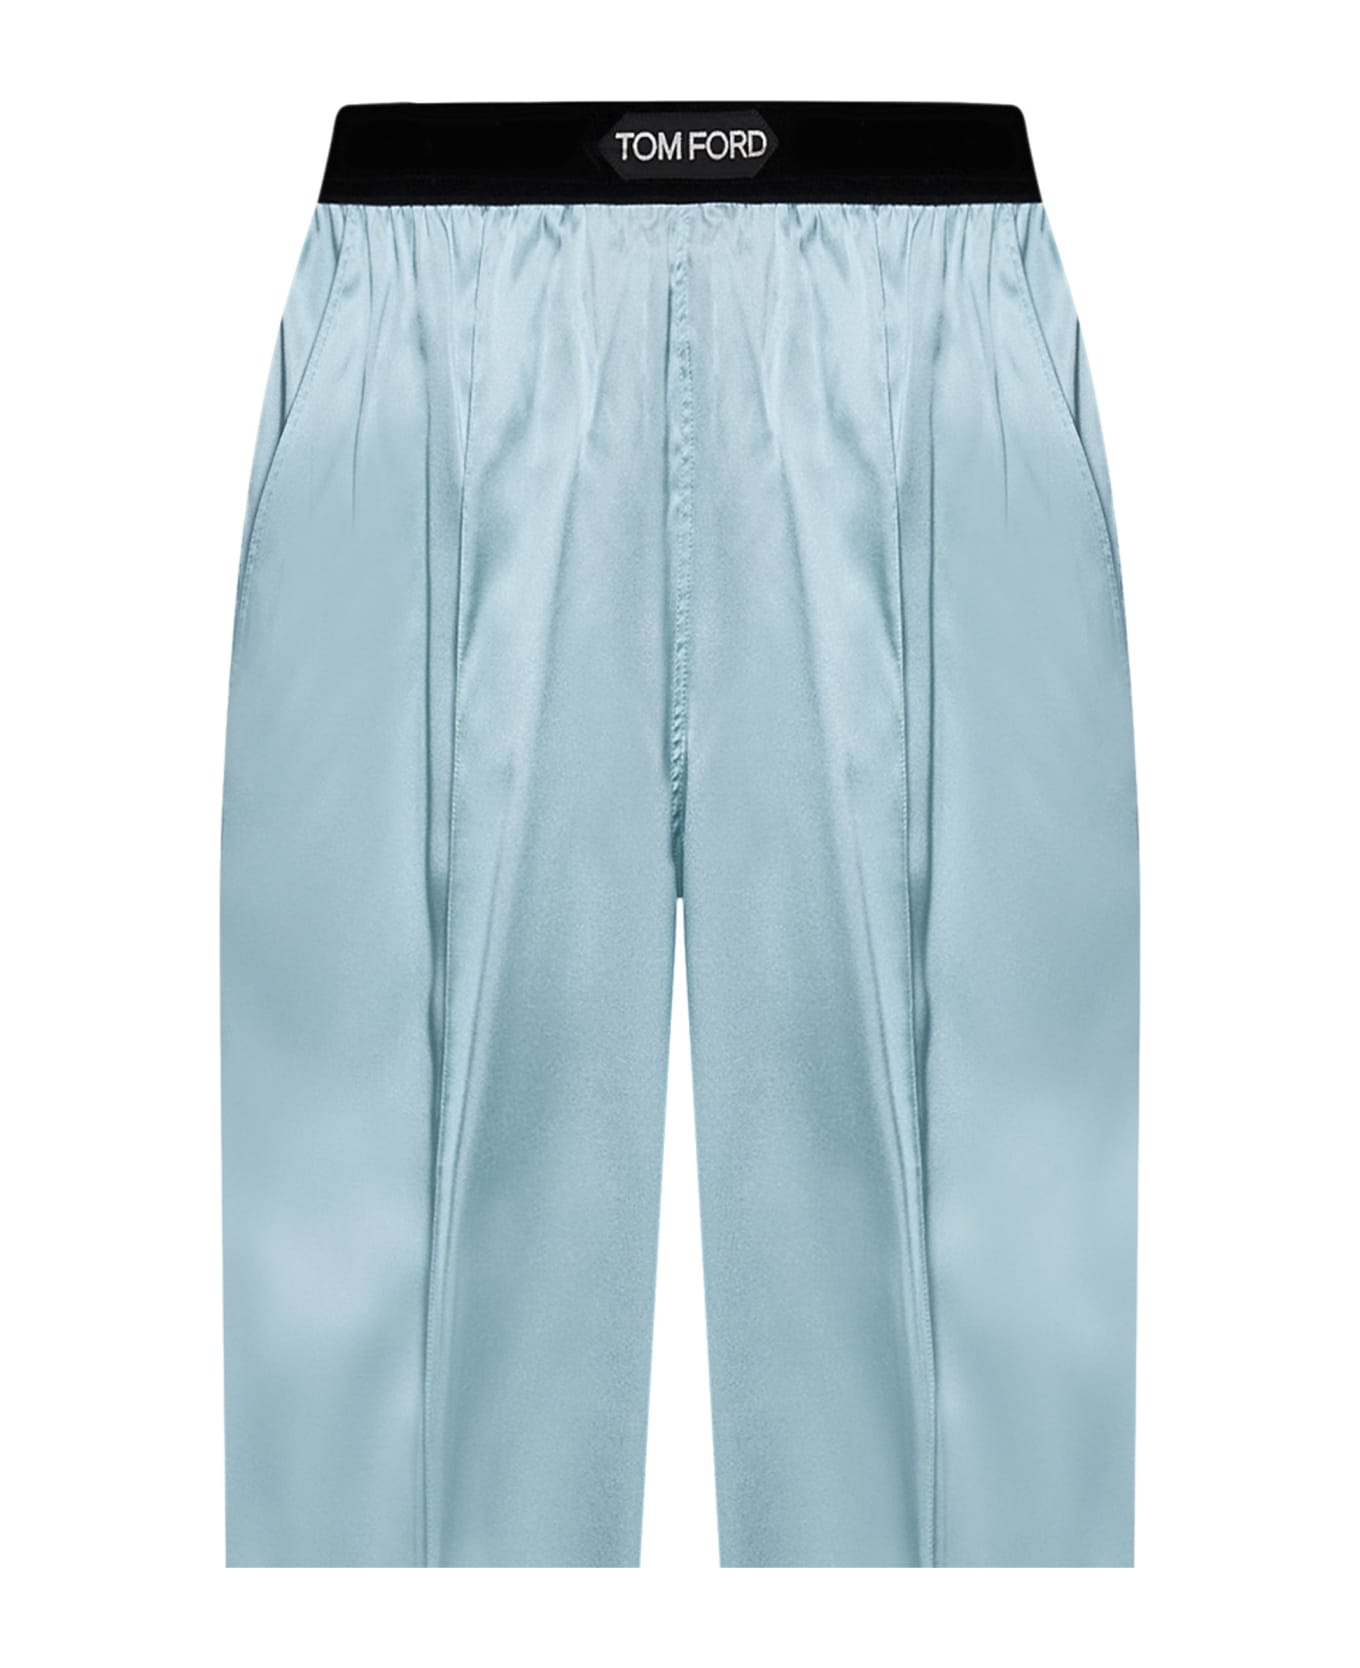 Tom Ford Trousers - BLUE